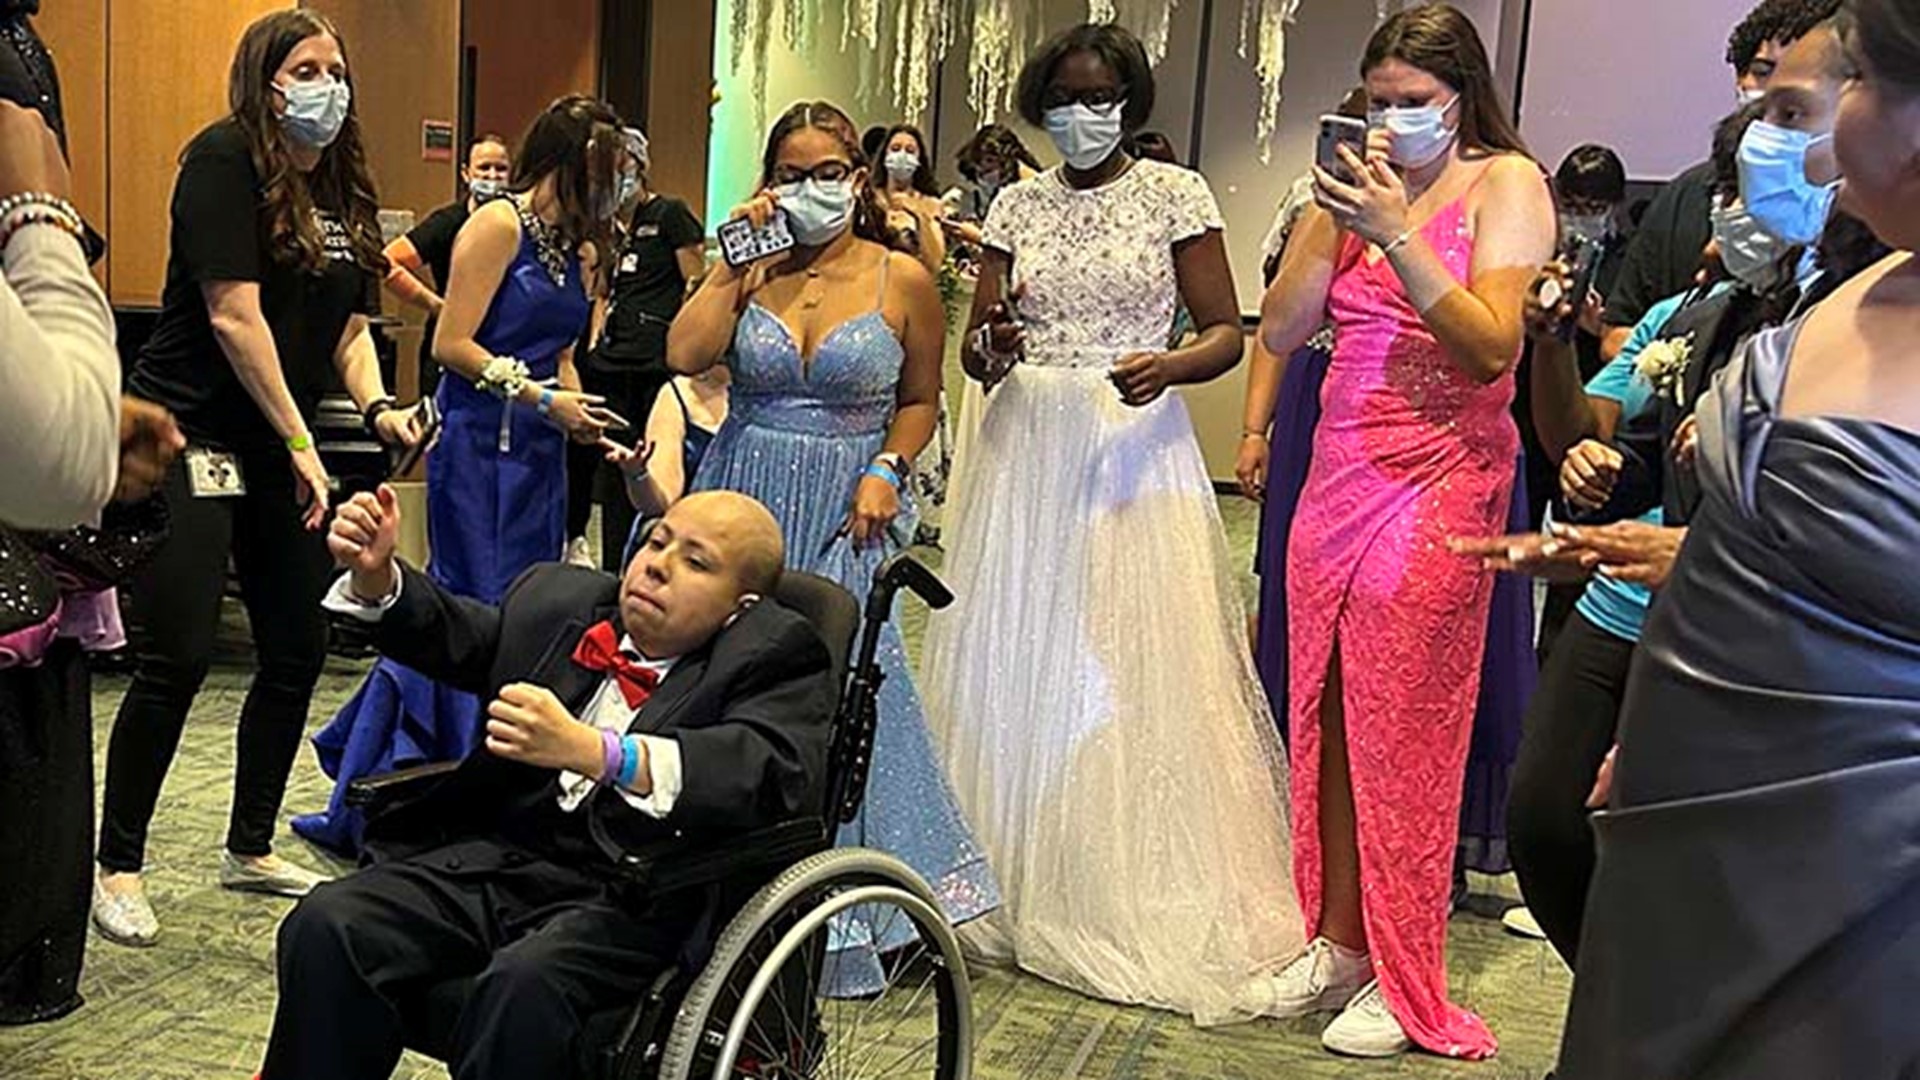 A lot of kids going through cancer have to miss school and special events like the prom. That's why MD Anderson throws a prom party every year.